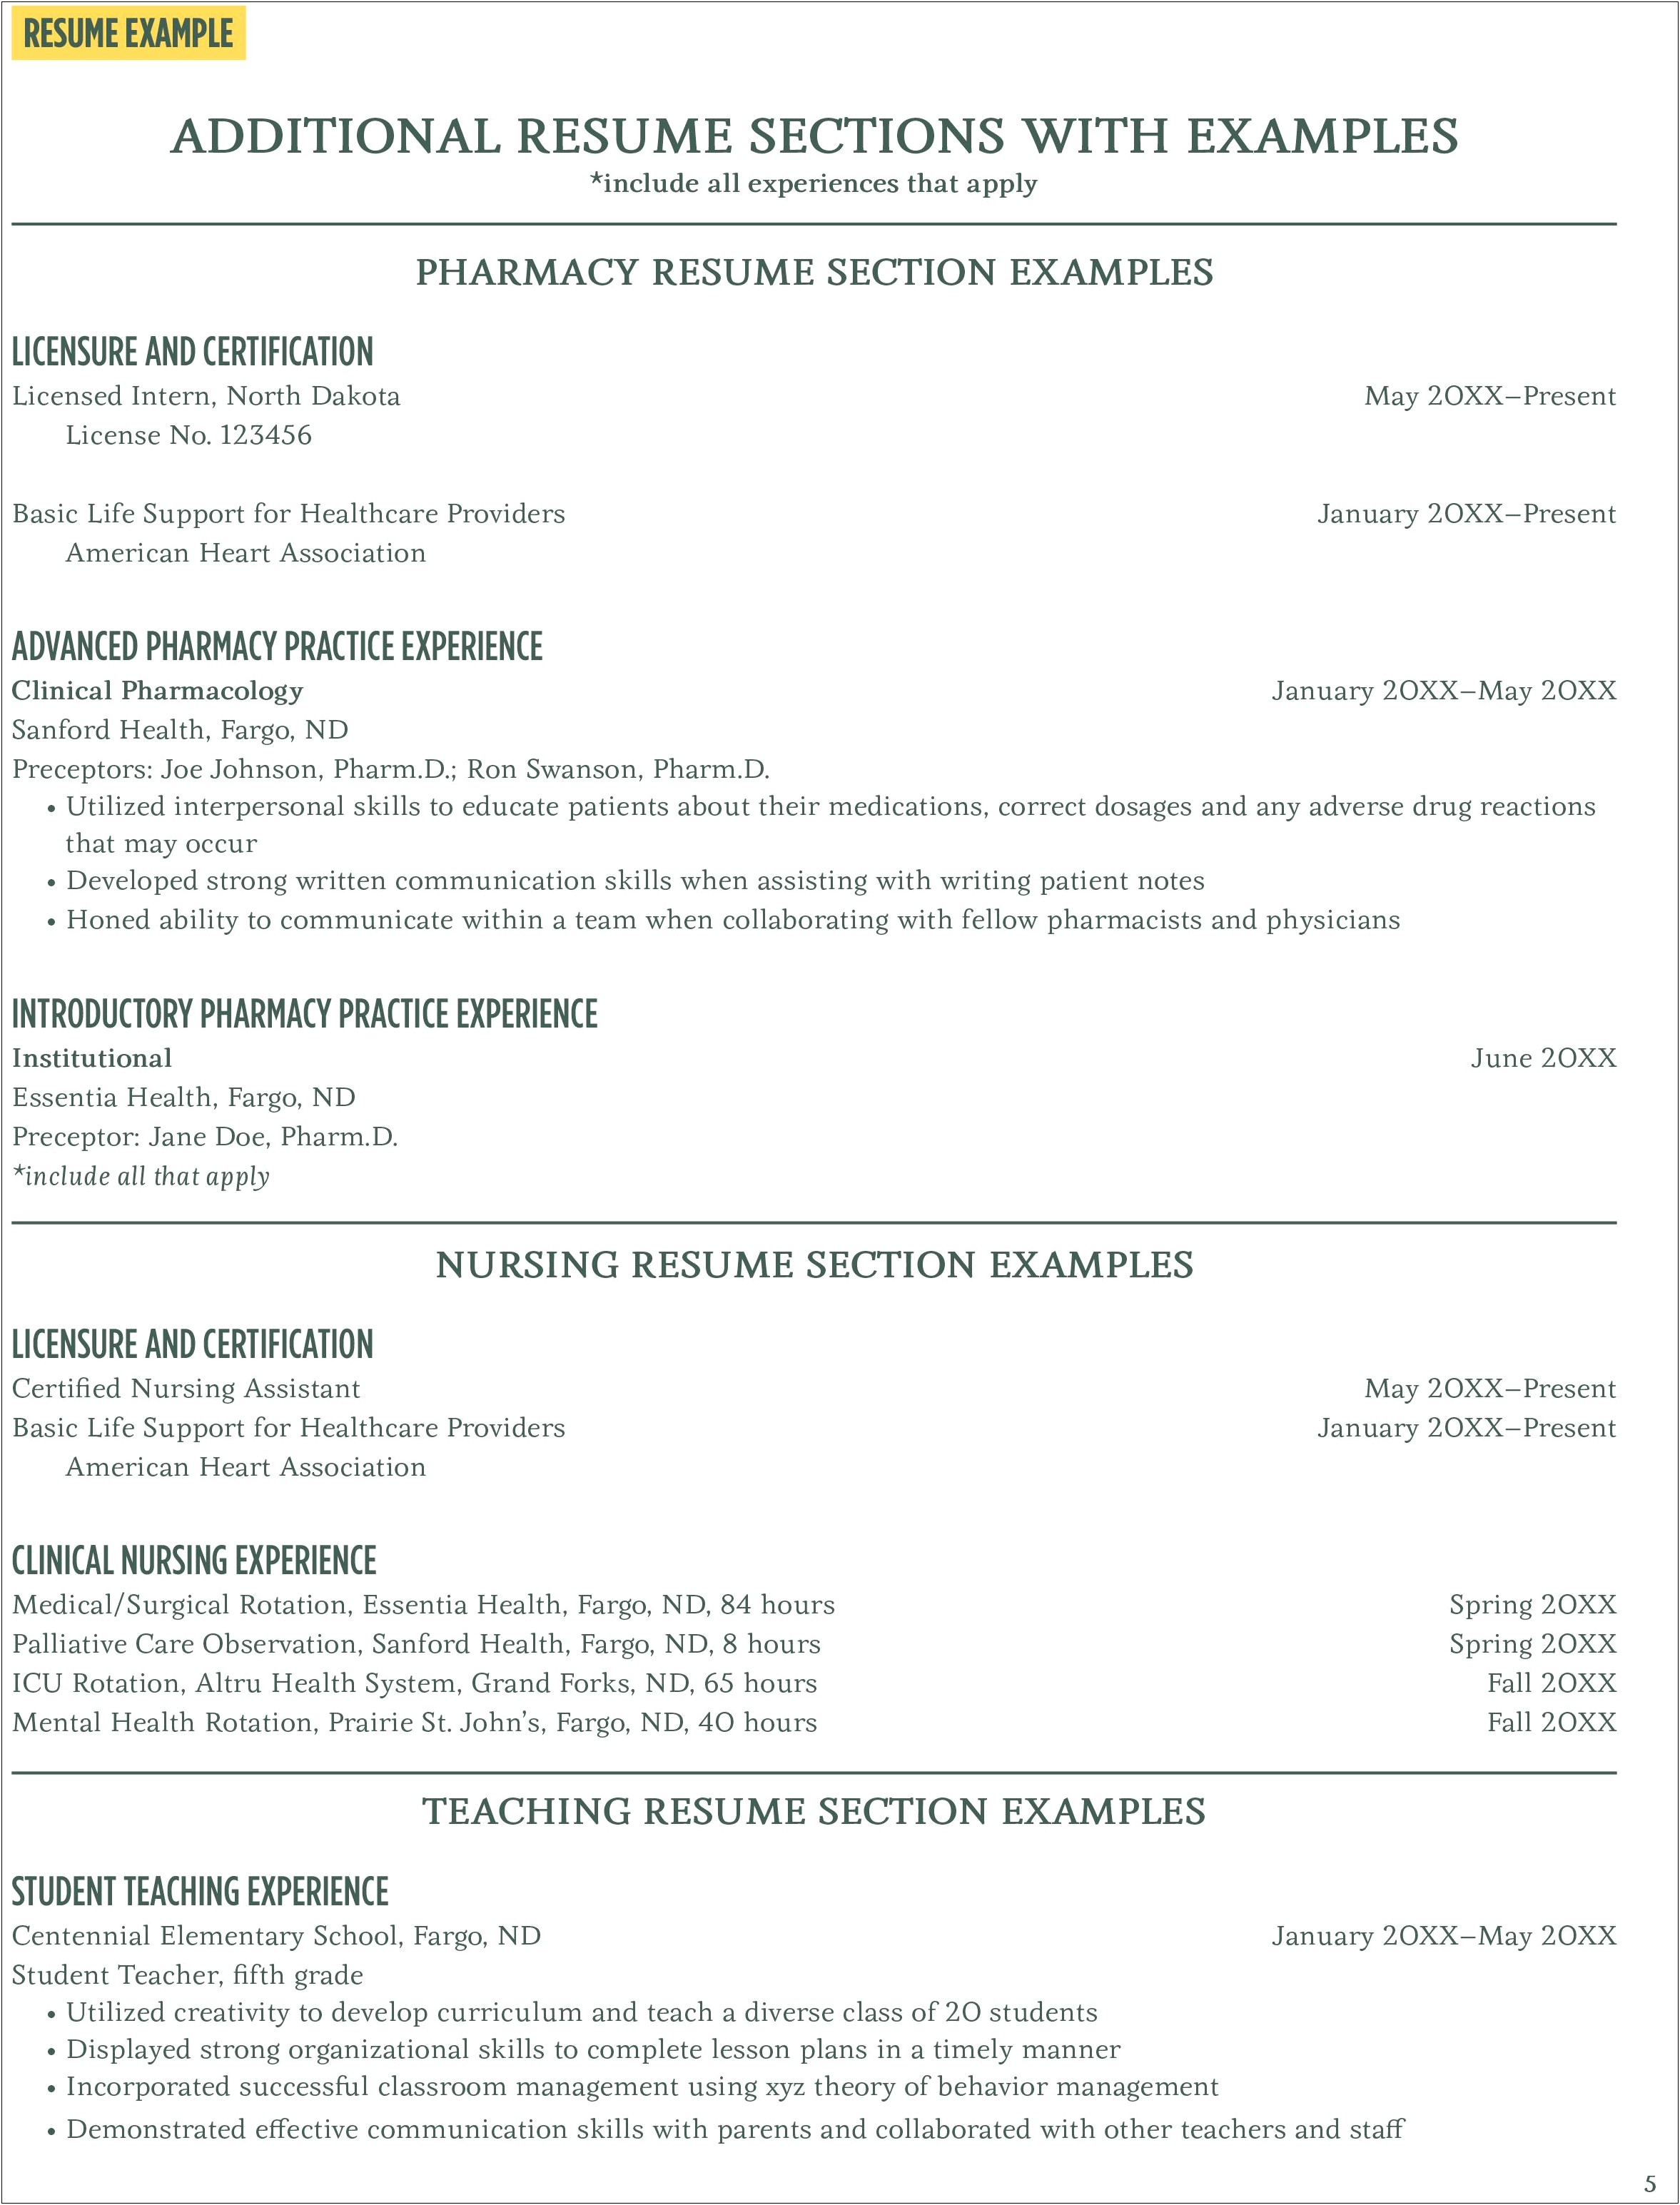 Resume Examples For Additional Skills